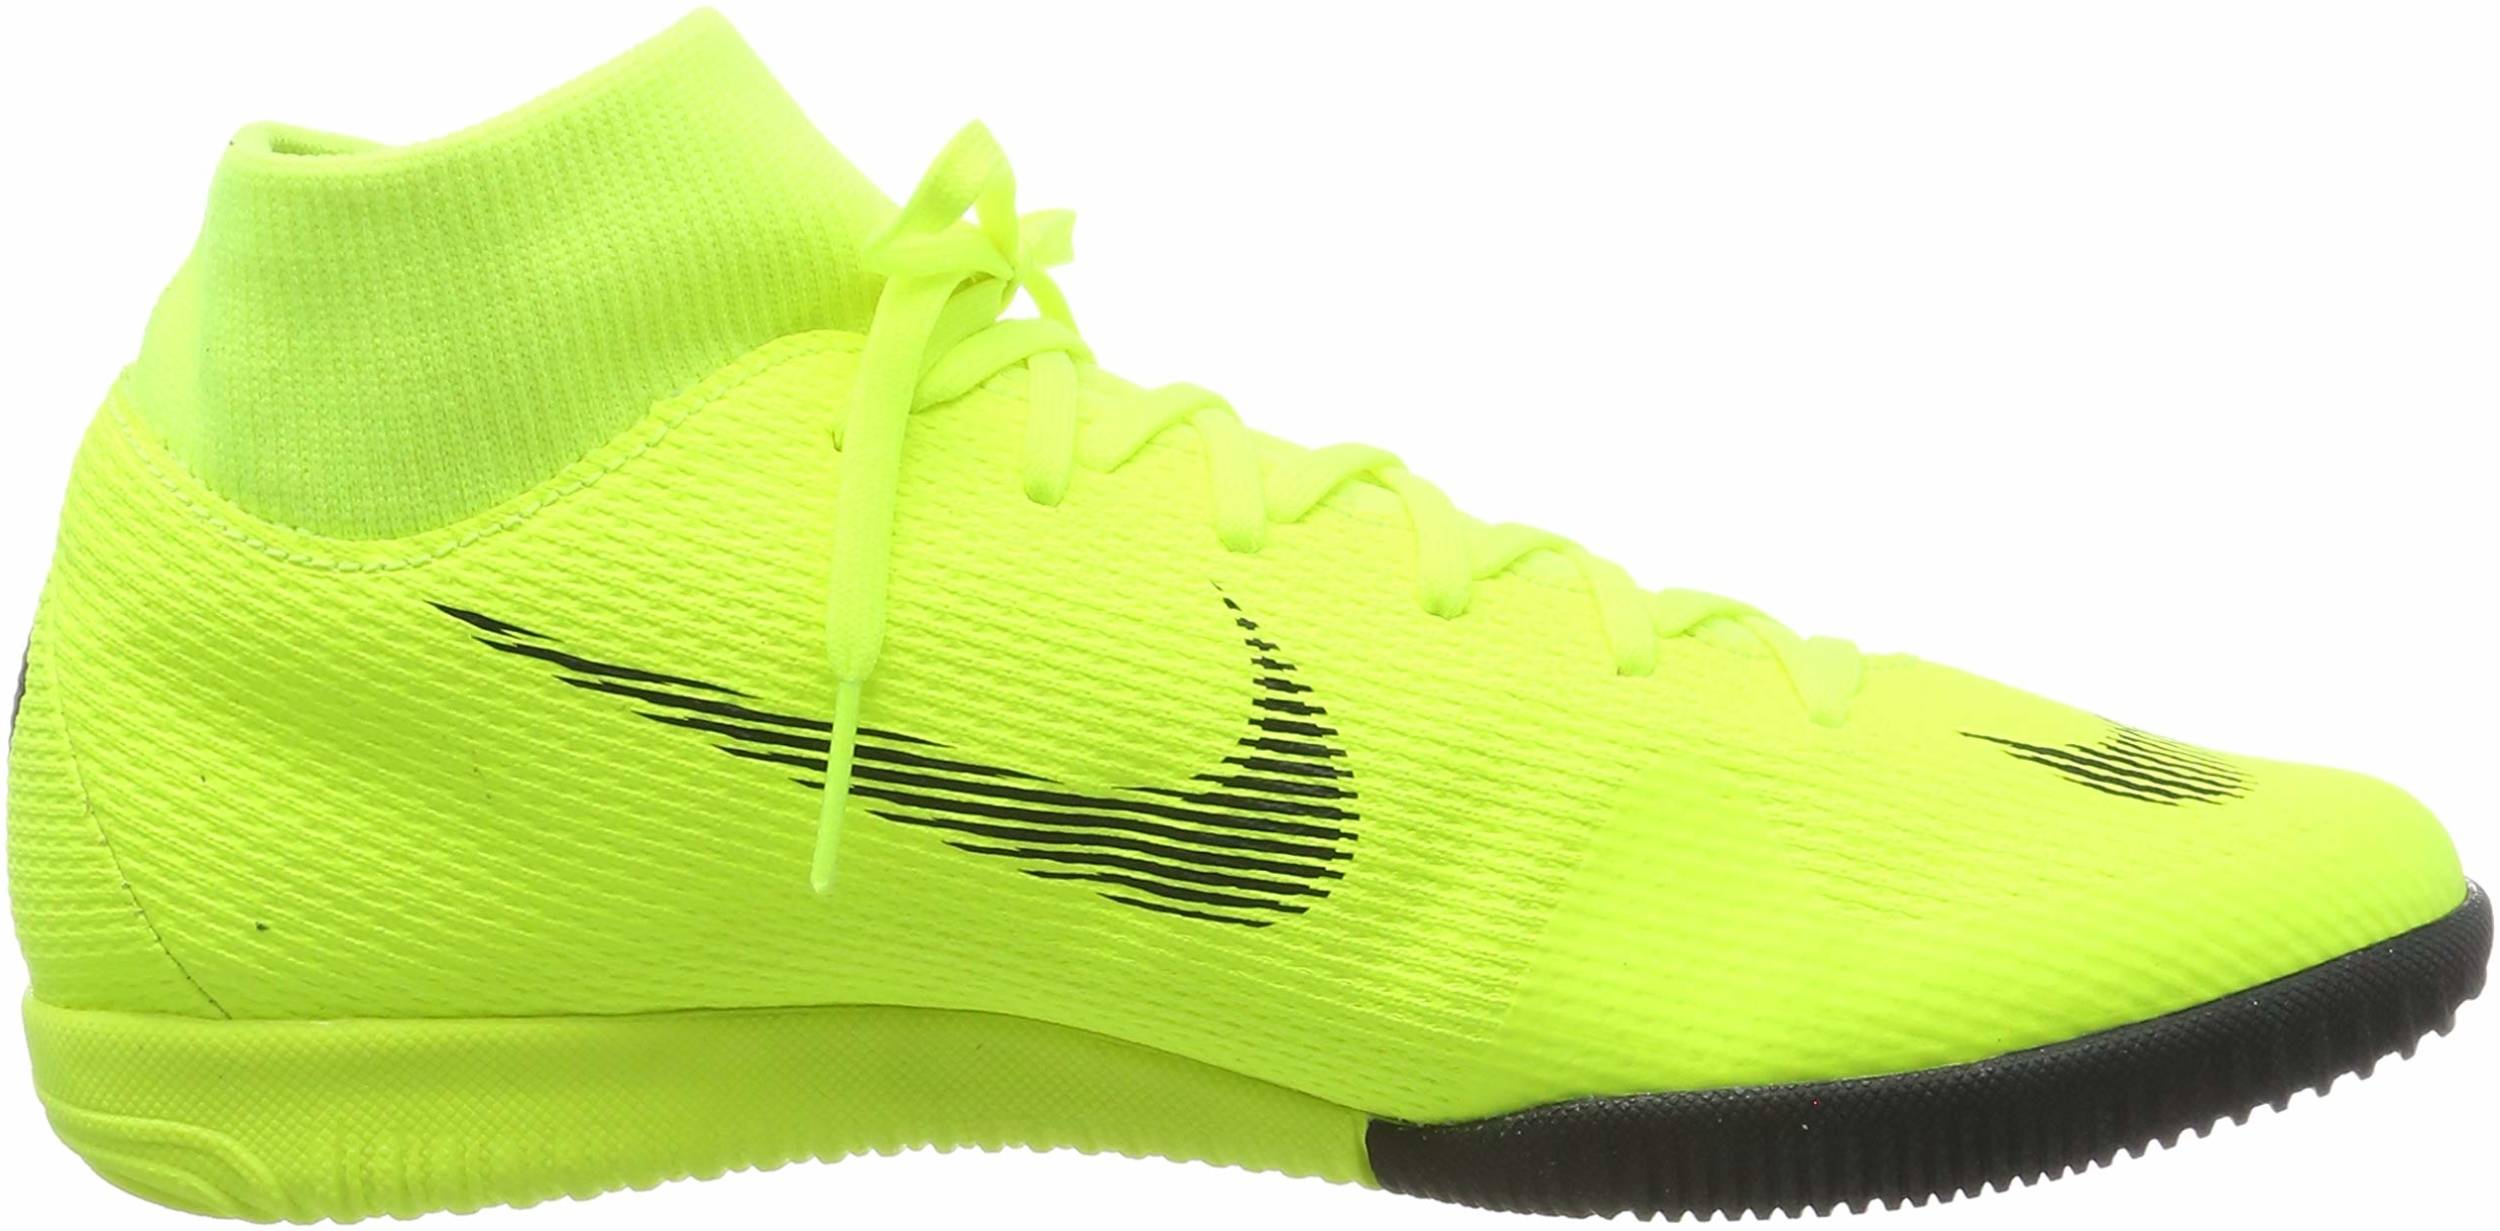 Save 38% on Nike Indoor Soccer Cleats 